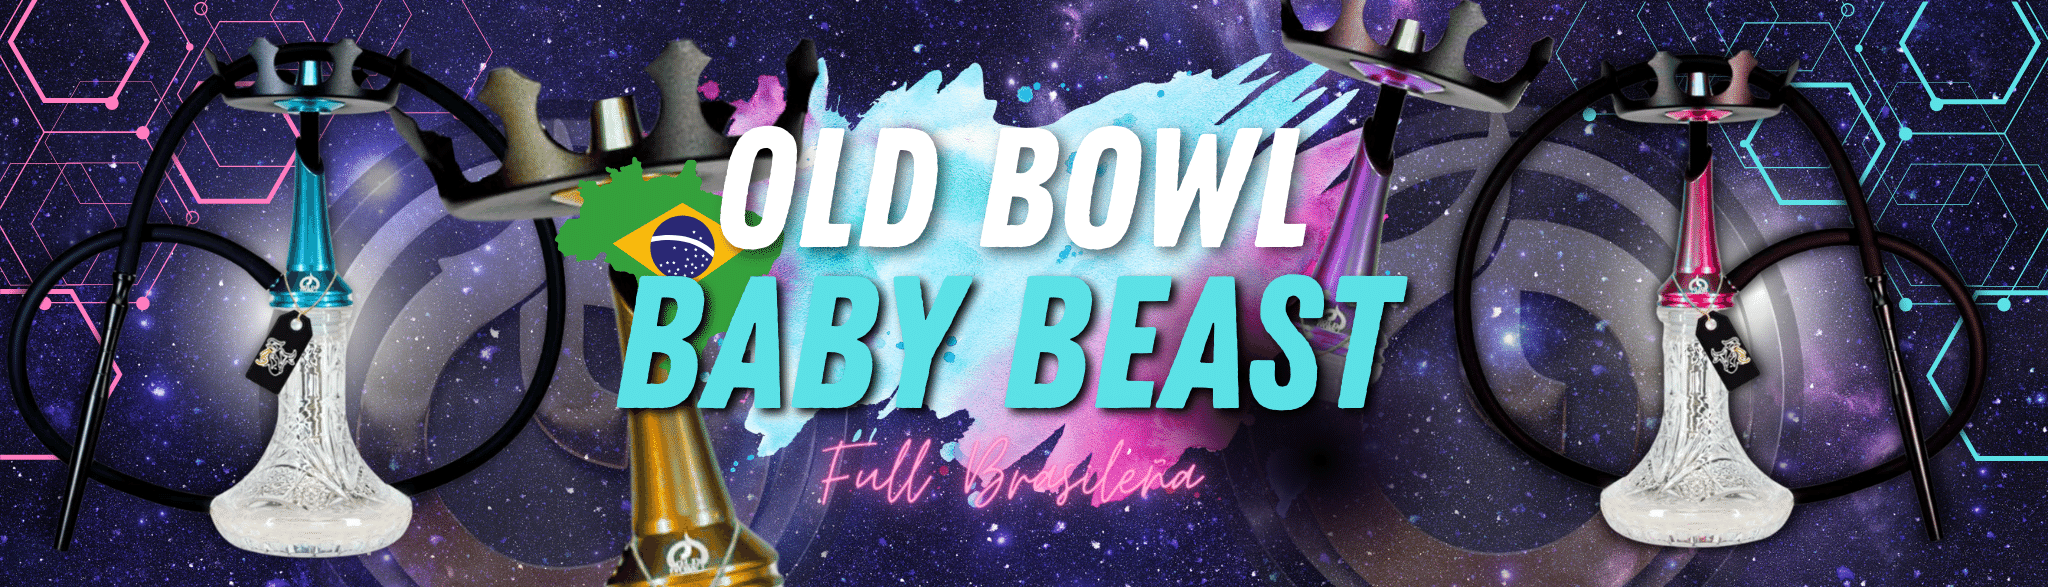 BANNER OLD BOWL BABY BEAST PC